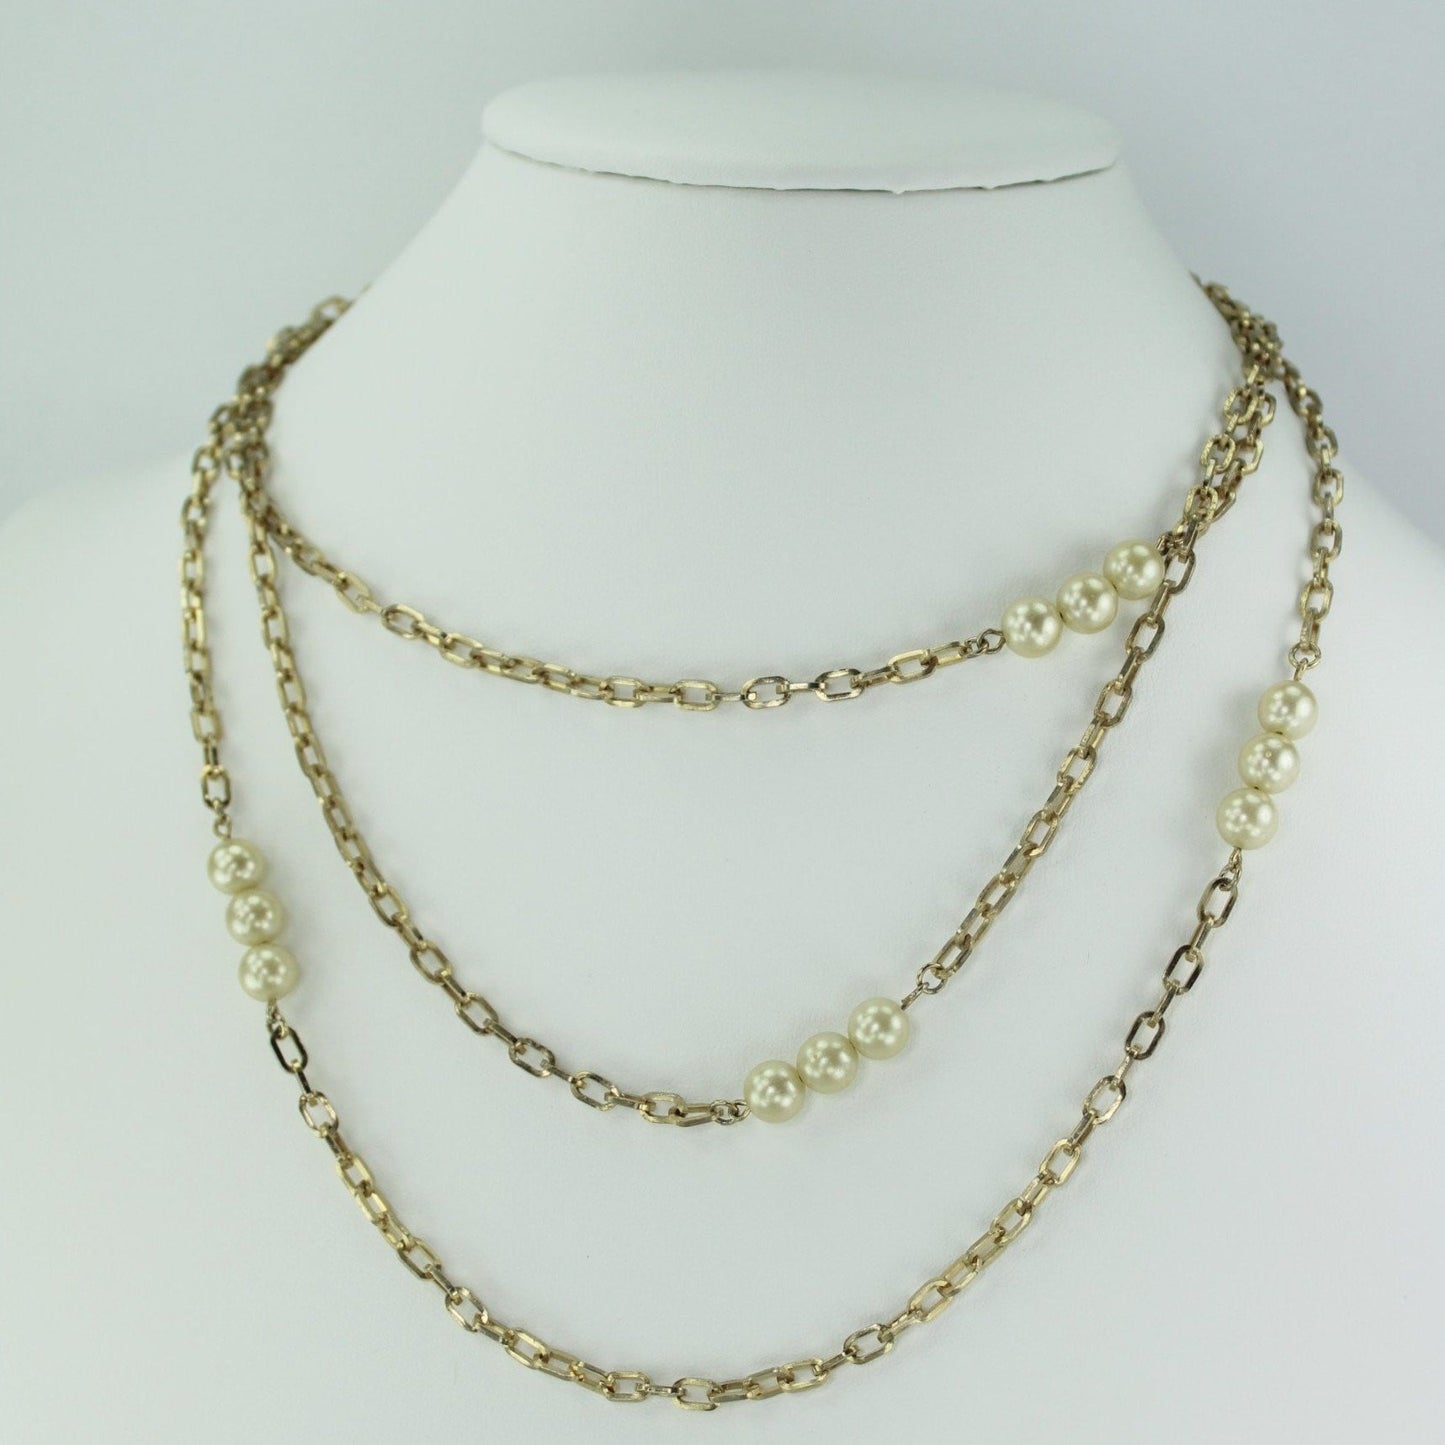 Vintage ALICE Caviness Necklace Long 29" Chain Triple Pearls Opera Length designer